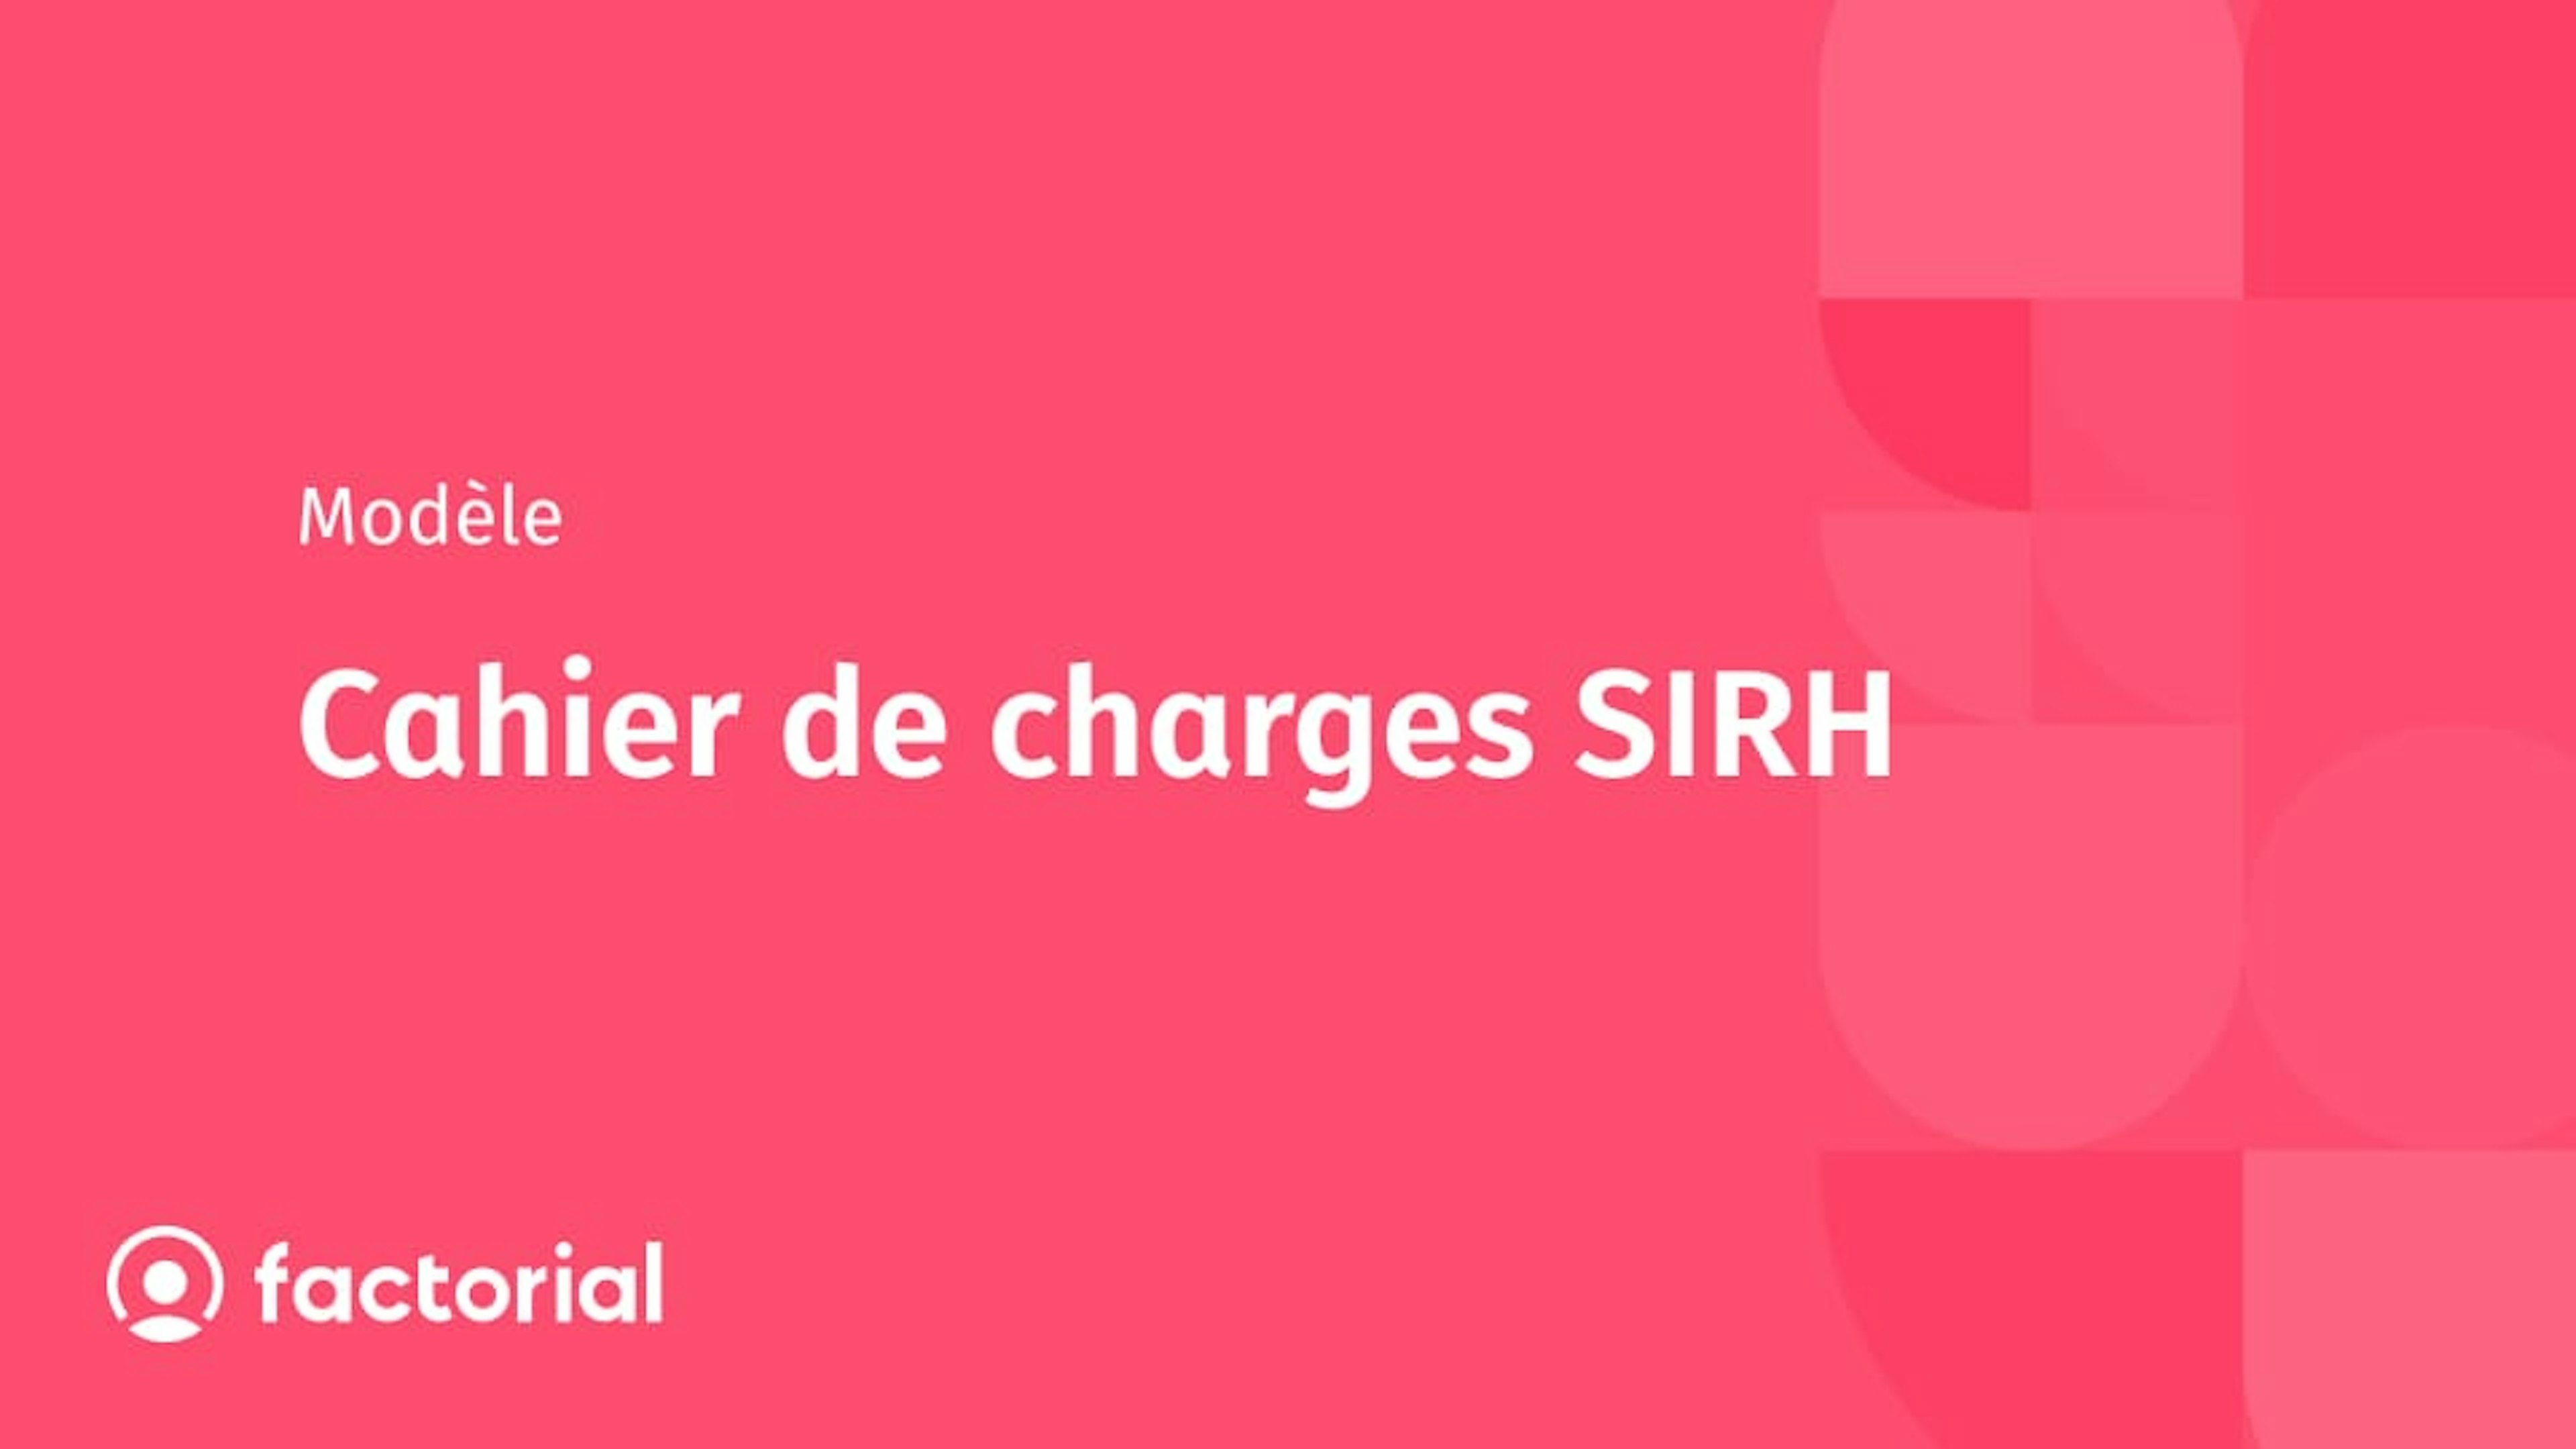 Cahier de charges SIRH